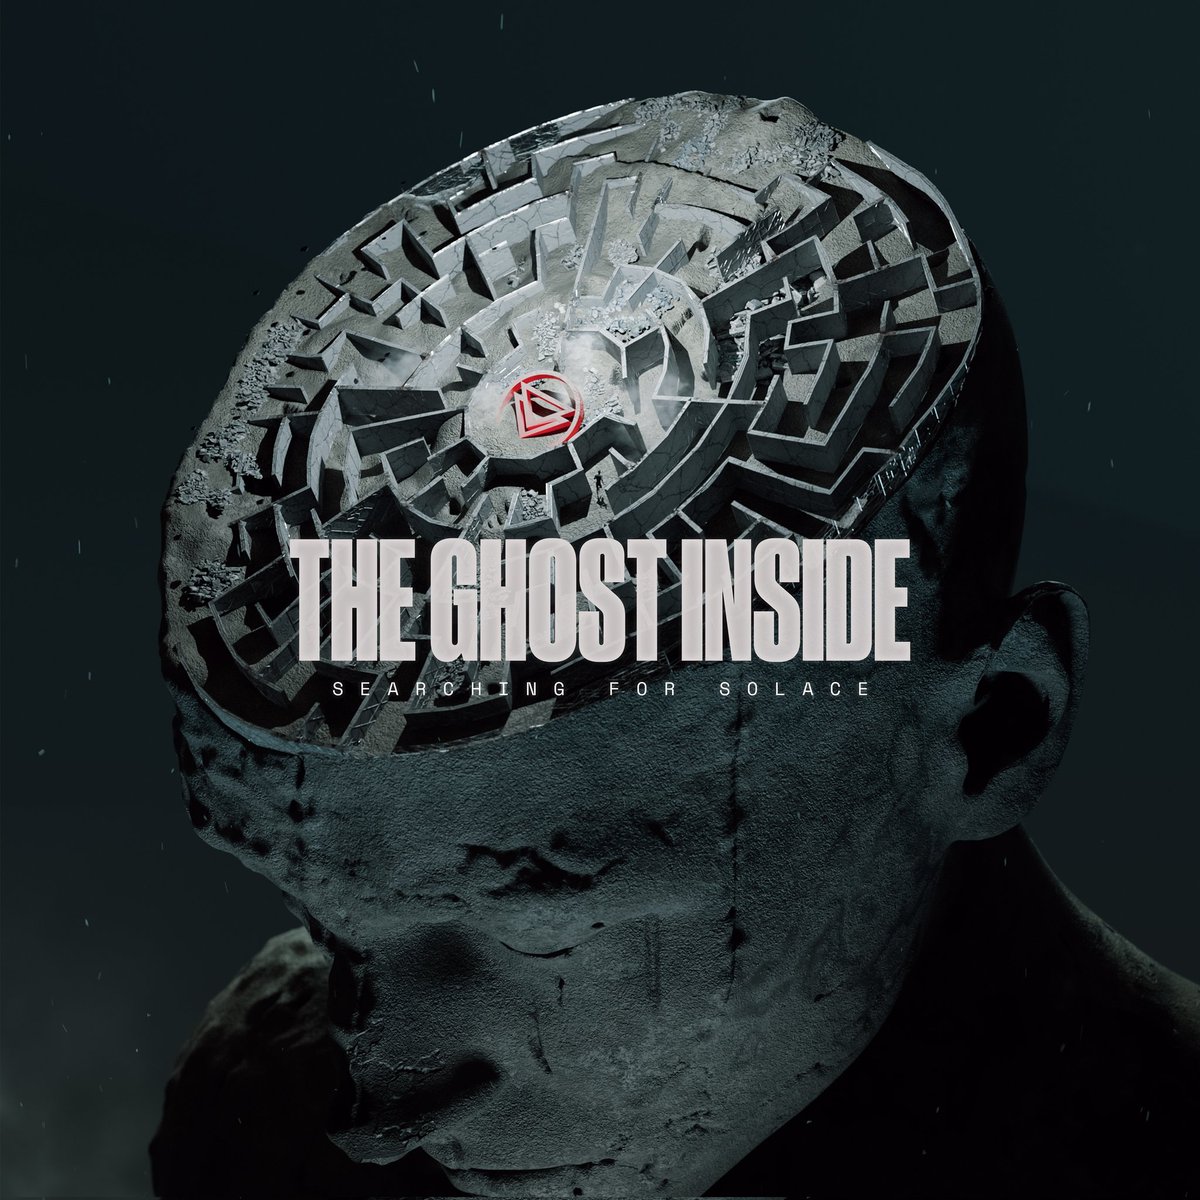 The Ghost Inside - Searching For Solace (2024)
Metalcore
USA
#rocknewsreleases #rocknewsrelease #rocknews
#rnr #rn #metalcore #theghostinside 

@theghostinside